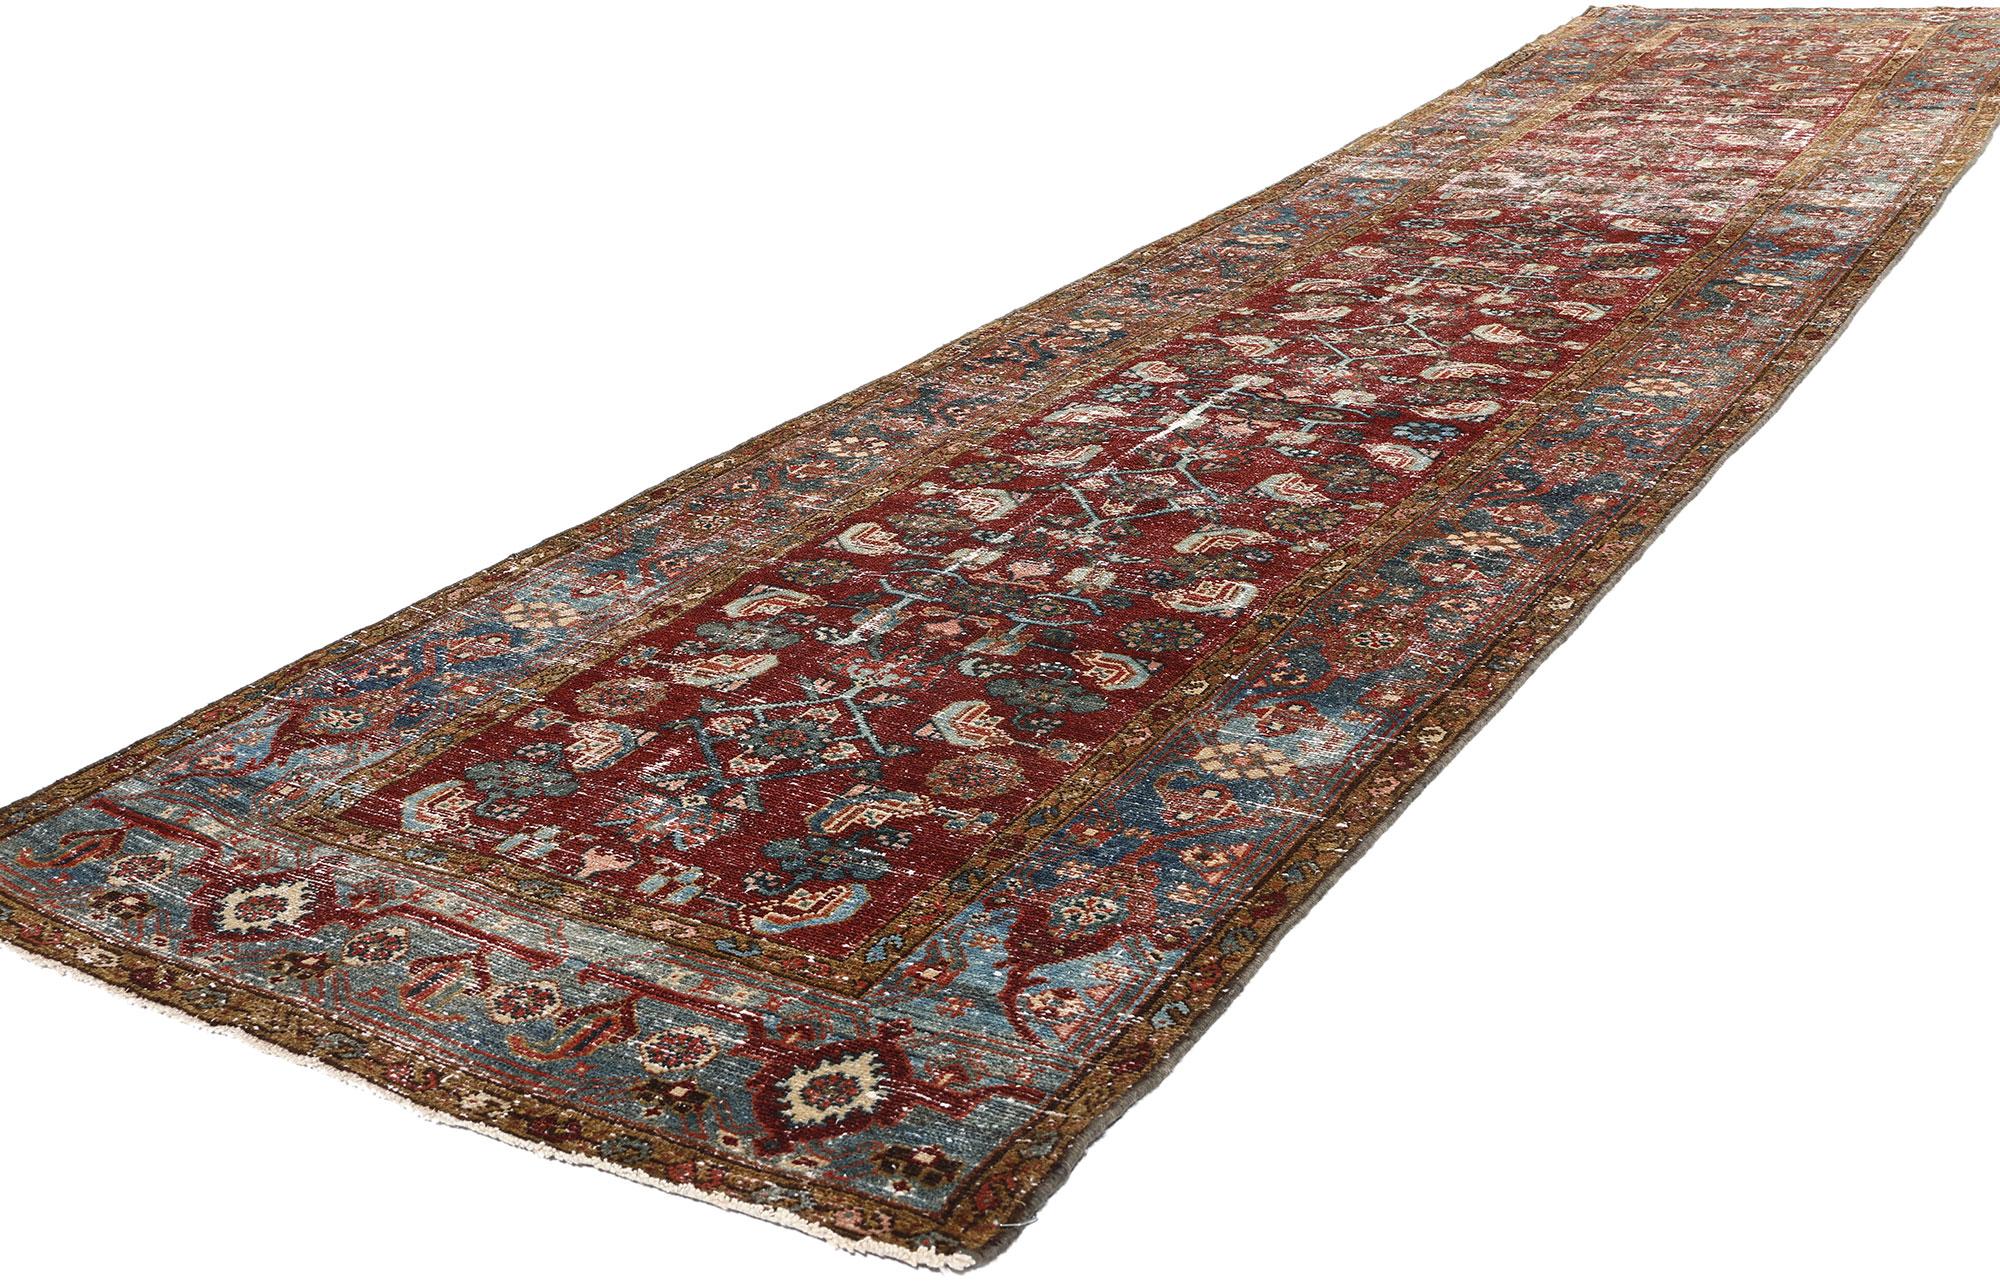 60975 Distressed Antique-Worn Persian Malayer Rug Runner, 03'05 x 14'10. Distressed antique-washed Persian Malayer carpet runners are a type of rug originating from the Malayer region in western Iran. These Persian runners undergo a special process